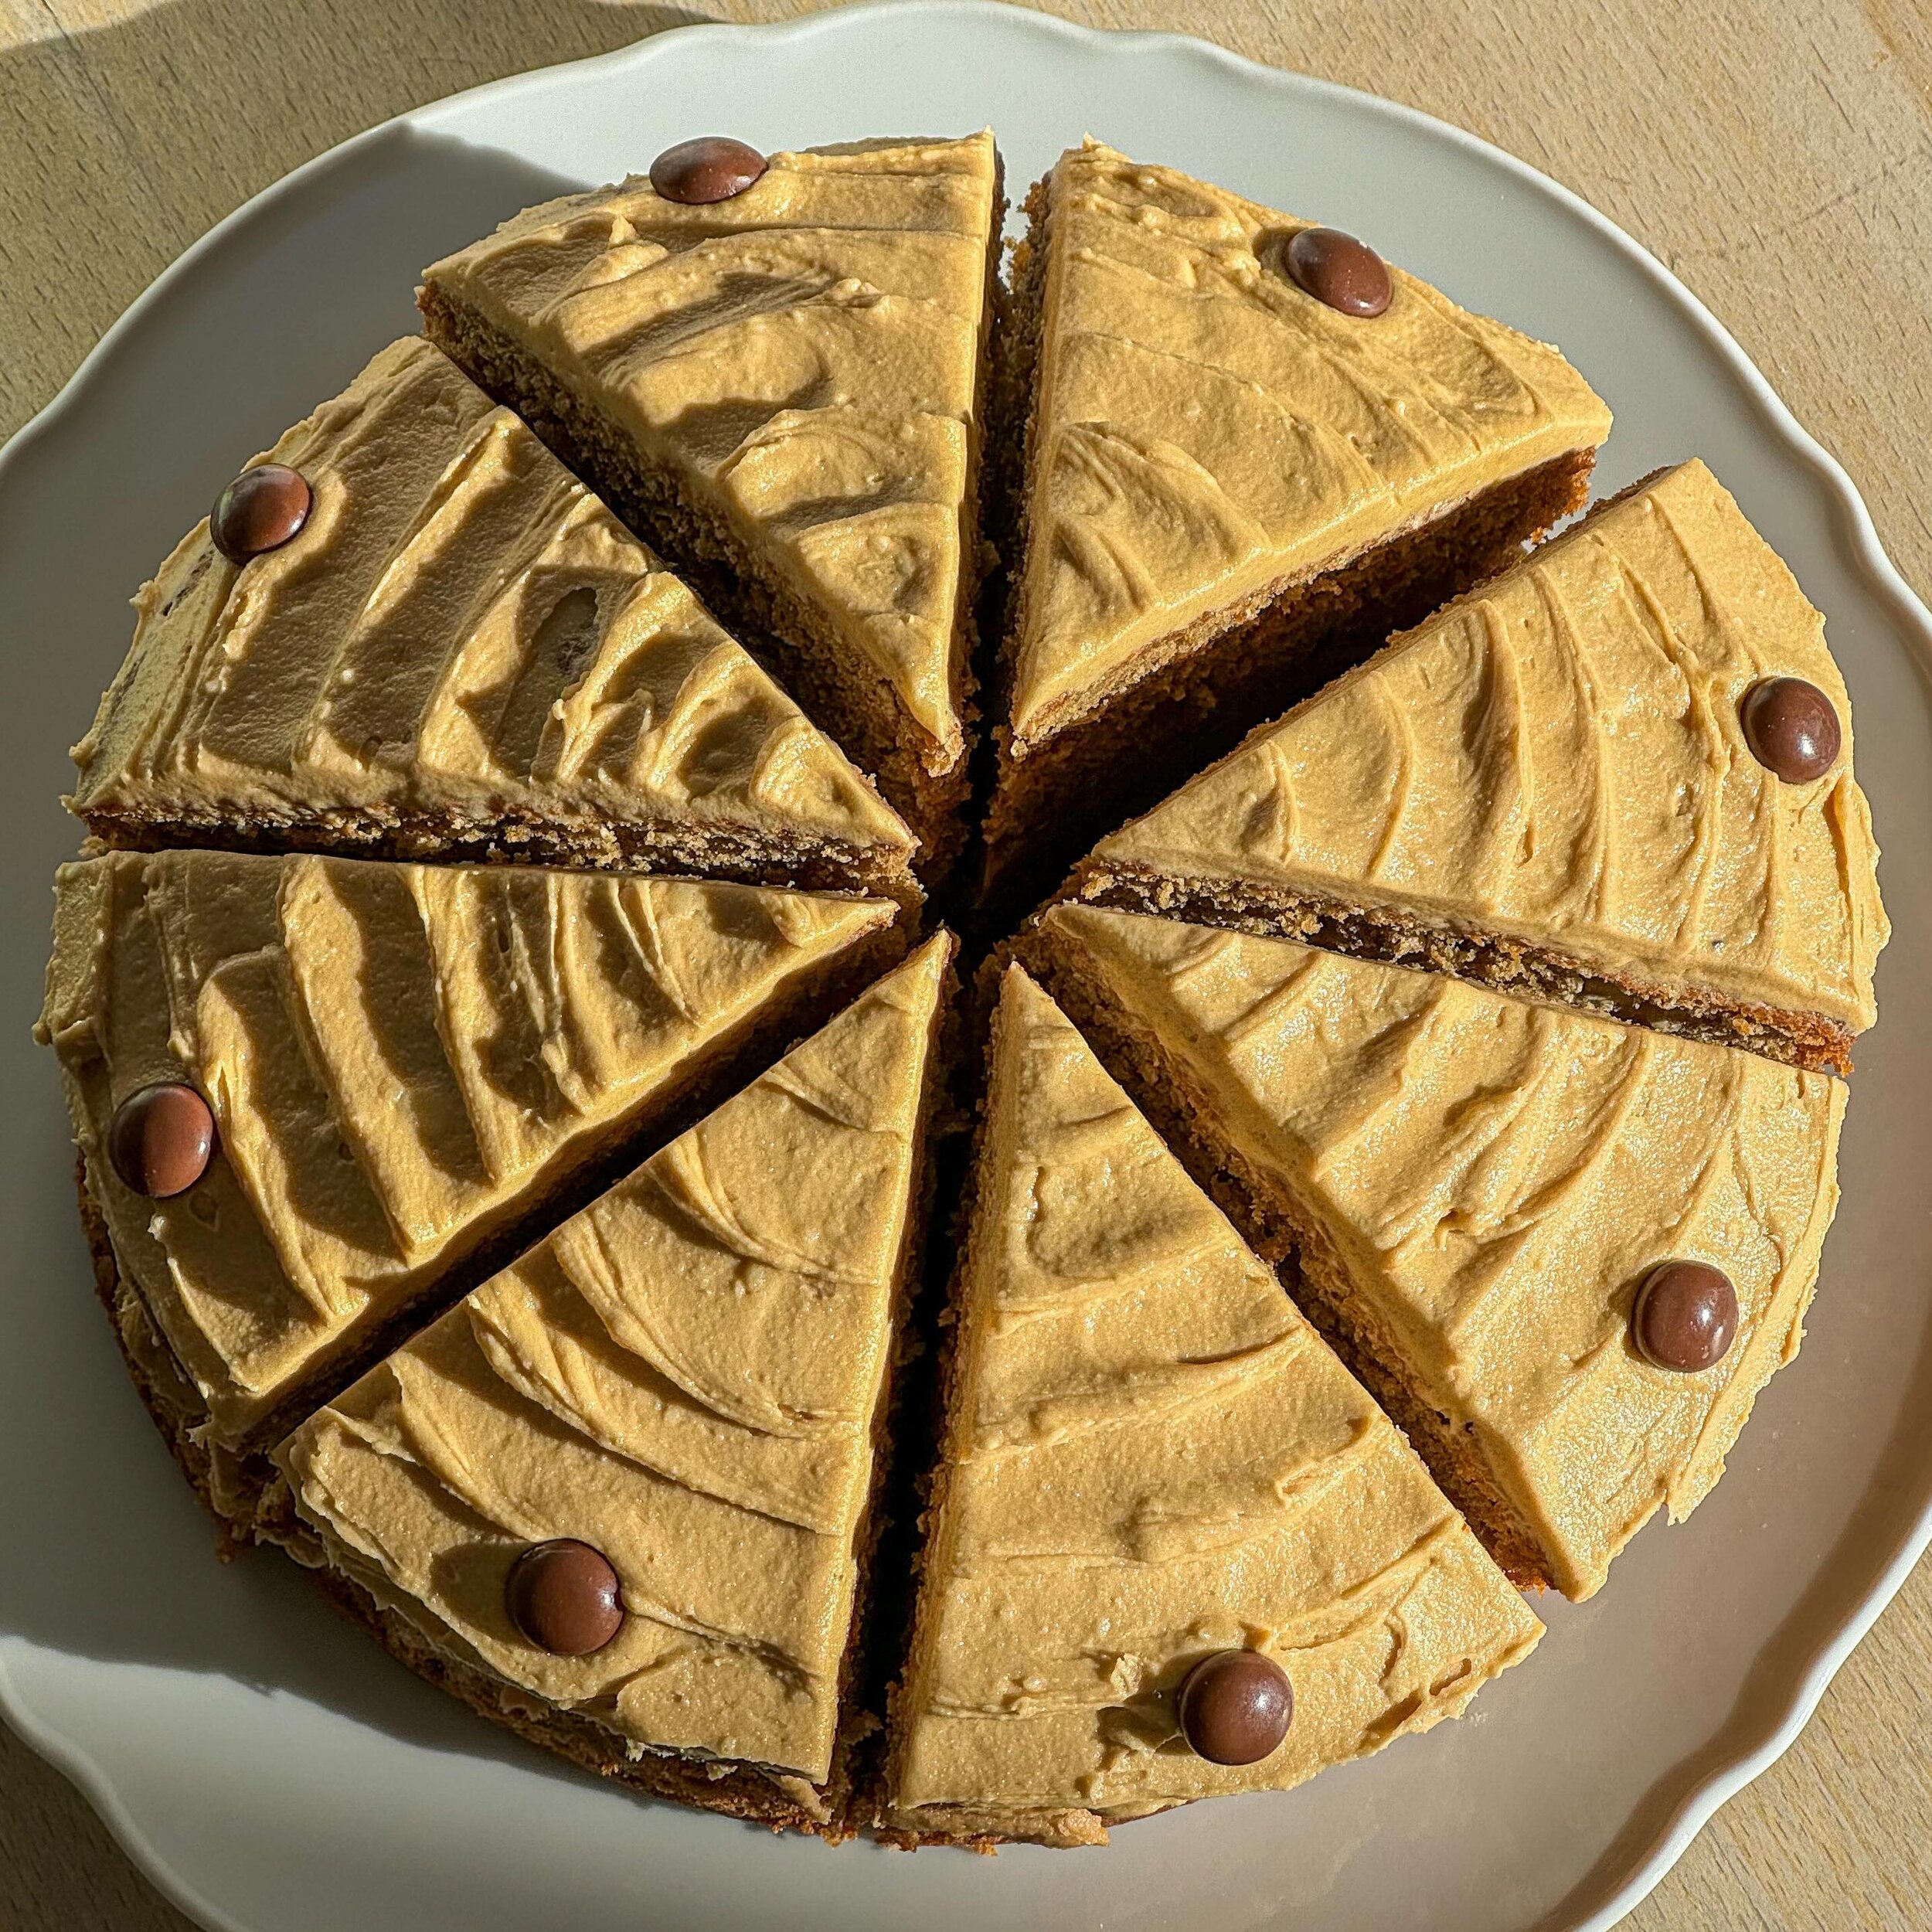 Our delicious coffee cake, freshly baked and ready for you!